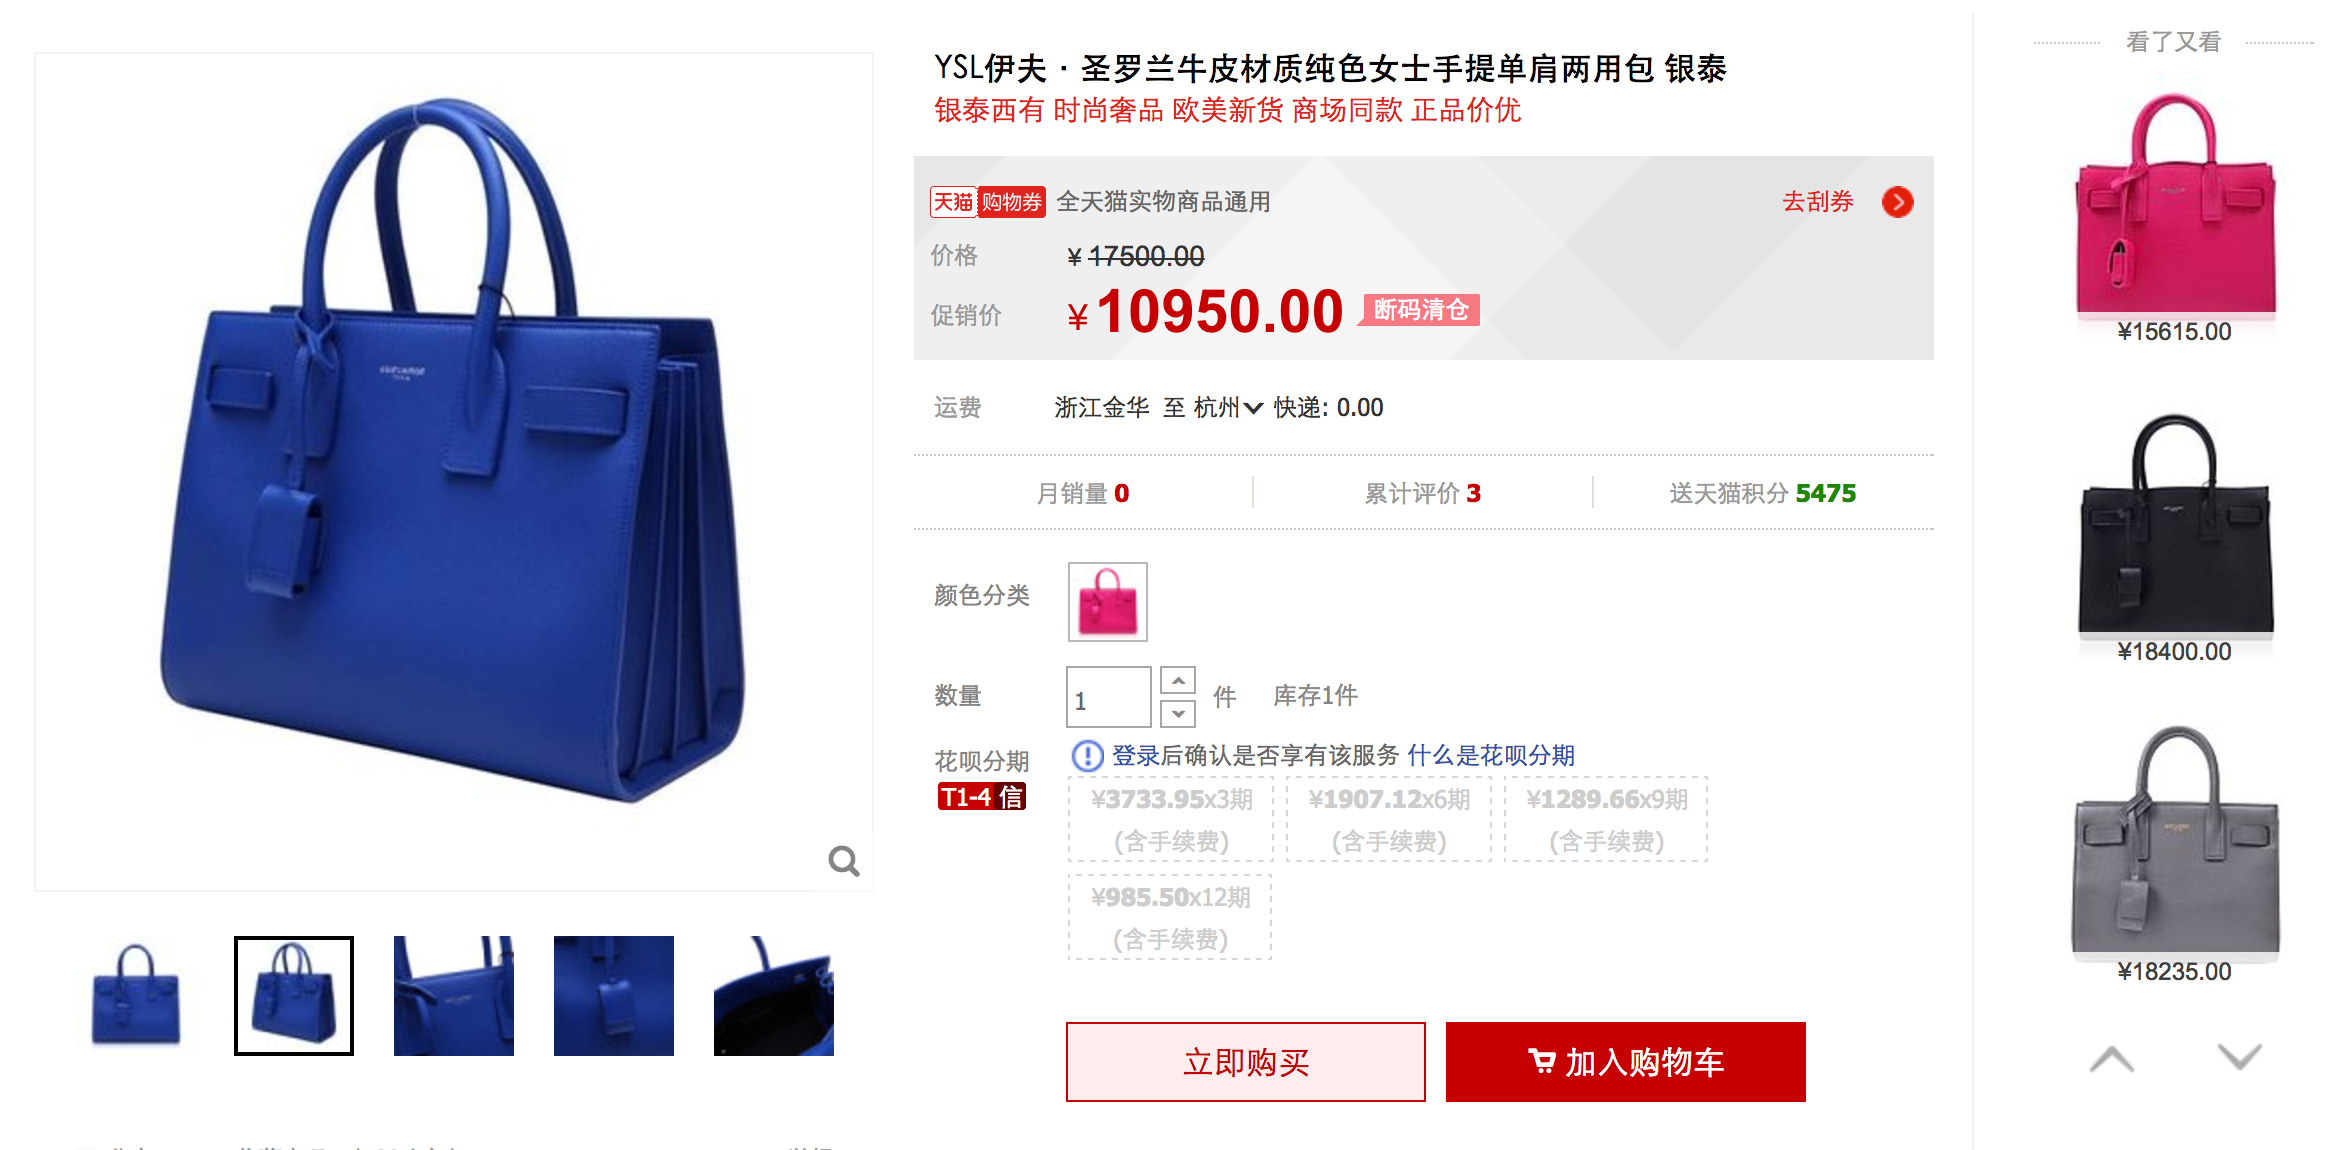 A seller claiming to have a real YSL handbag on Taobao. The bag is on "sale" for around US$1,500.